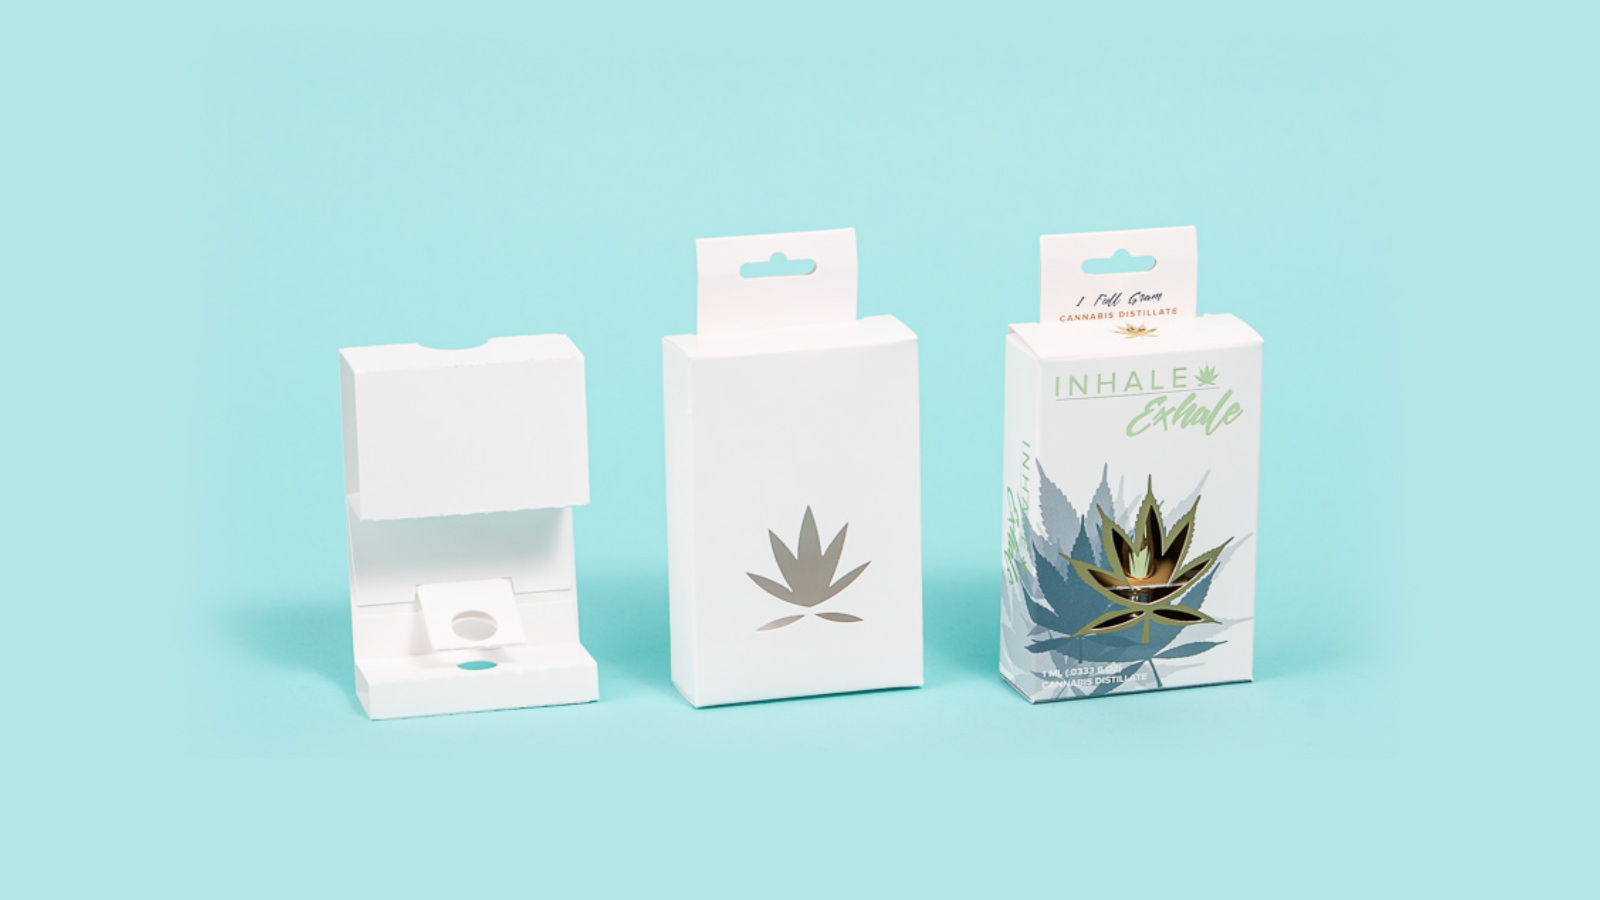 Box Designs for Premium Cannabis Brands: The Inhale Exhale Story